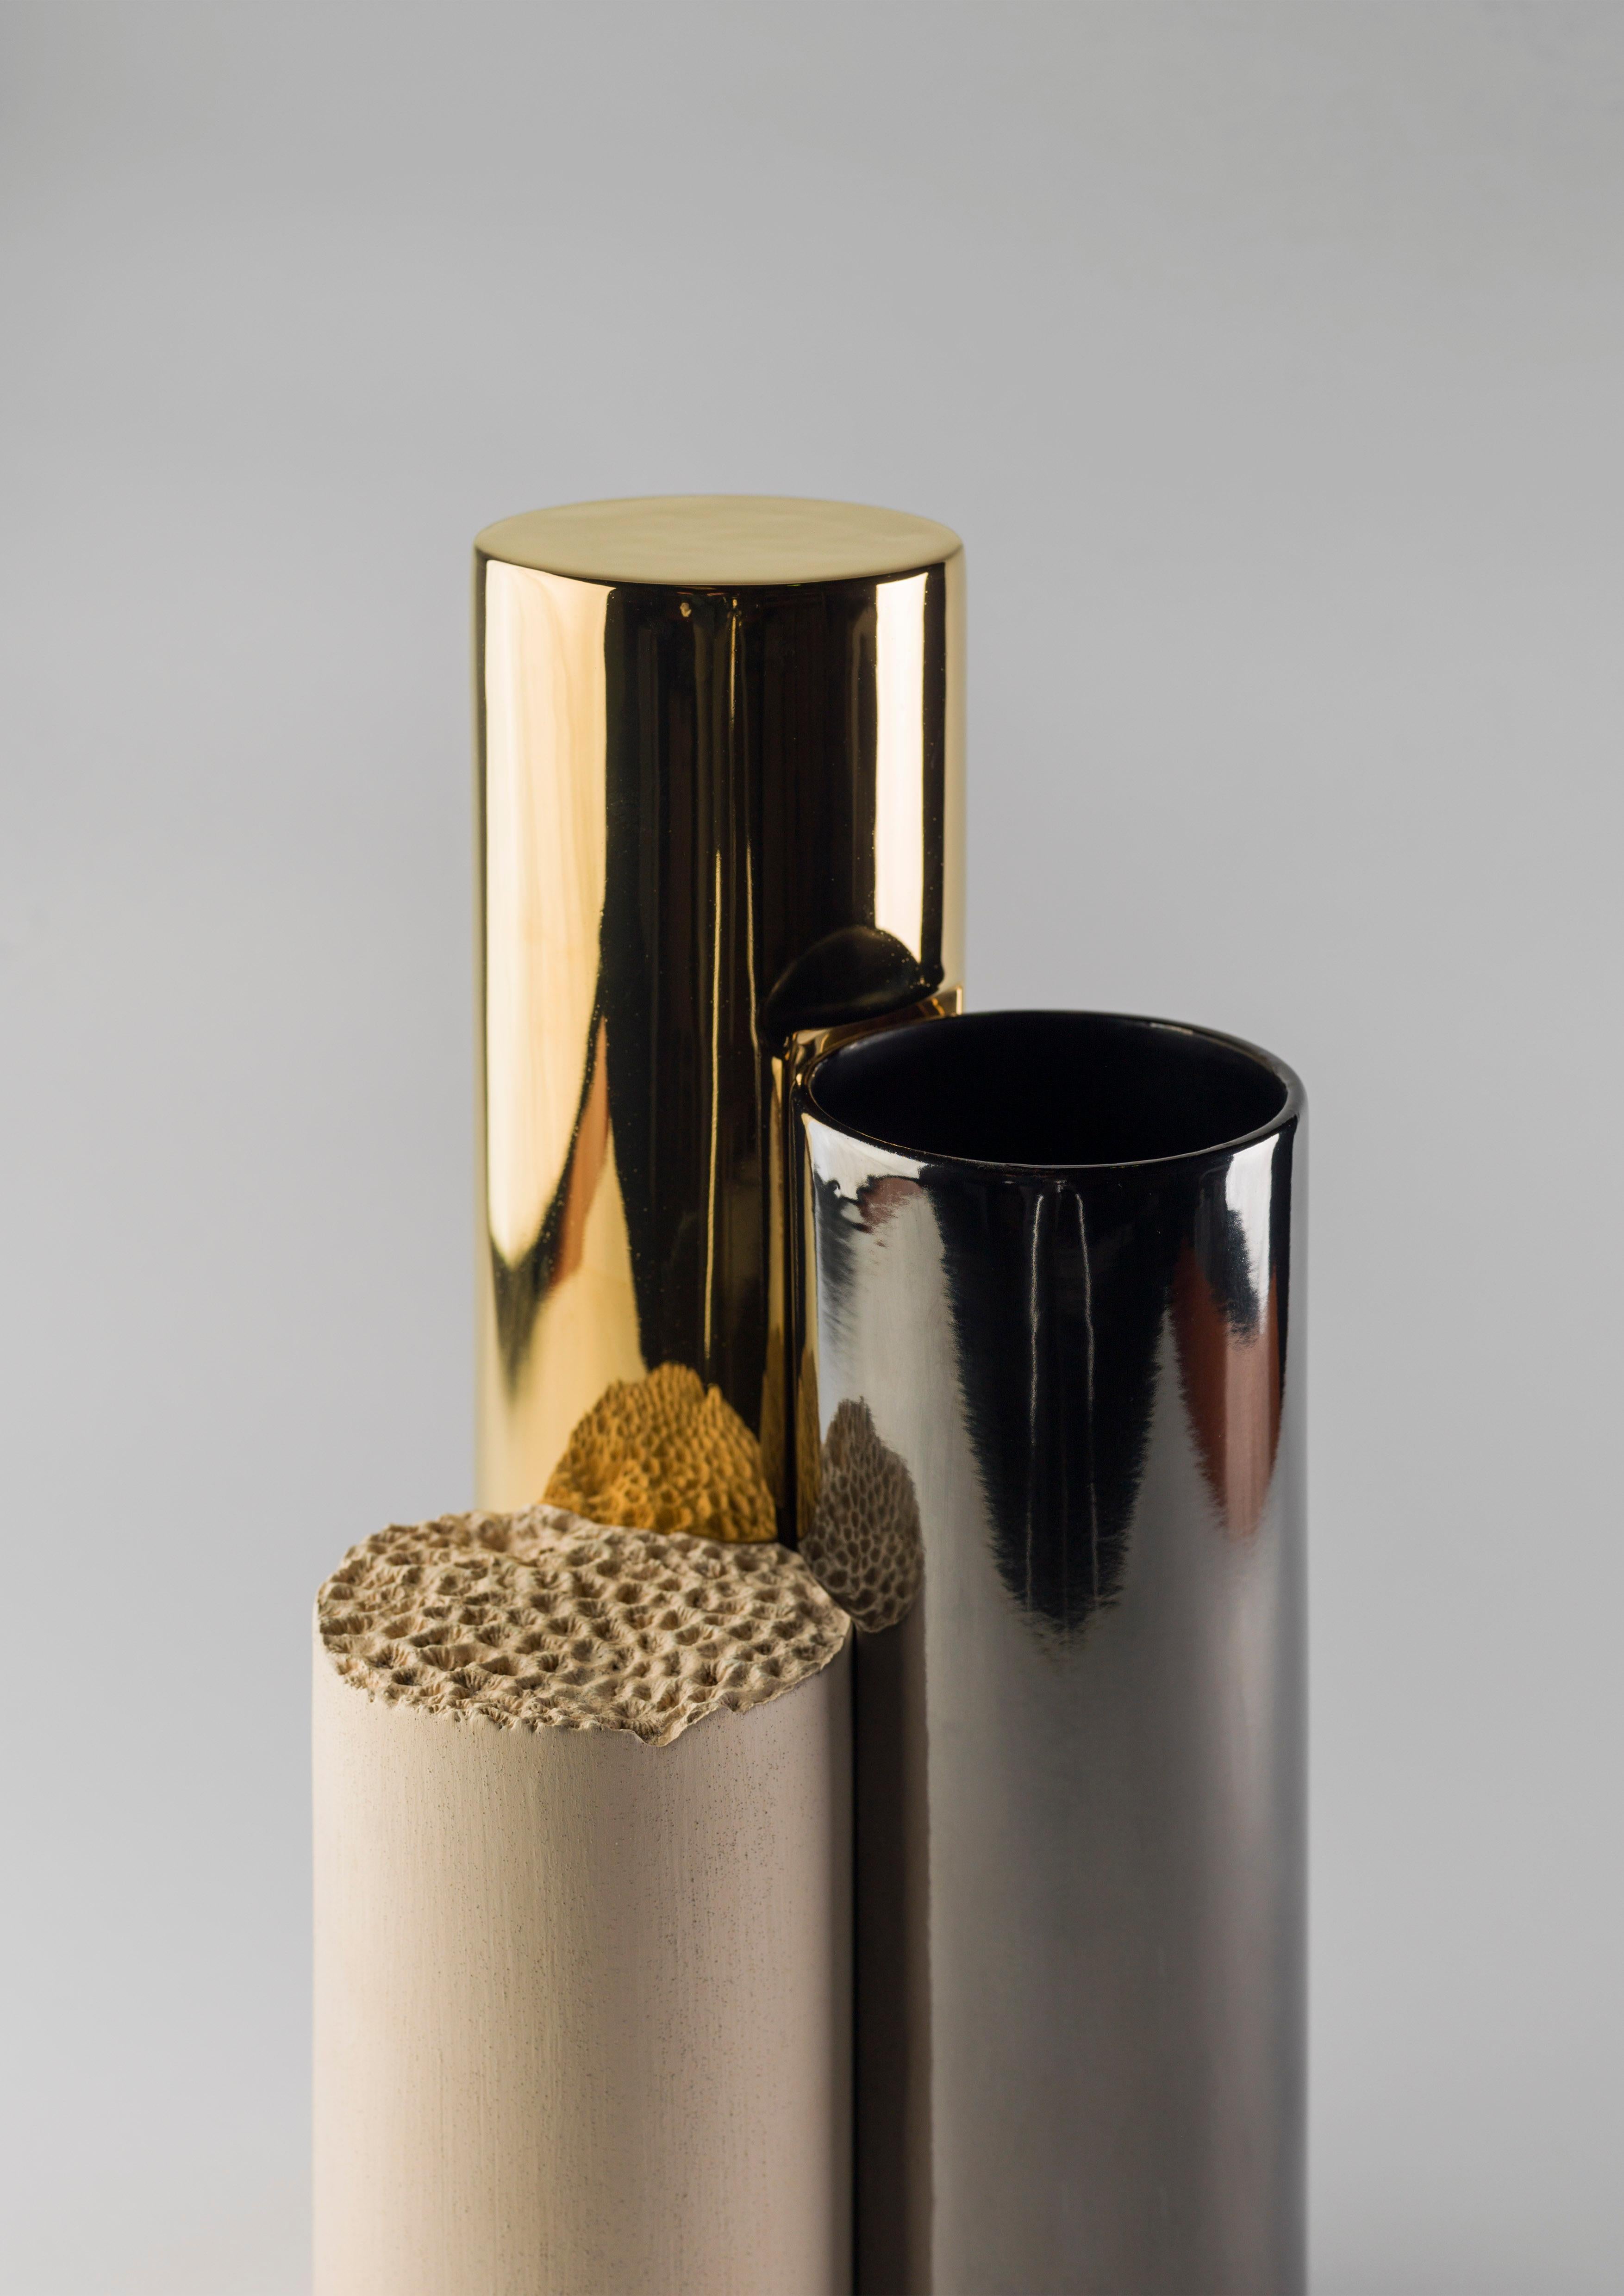 Modern Is-Dher Vase by H.E. Shk. Hind Majid Al Qassimi